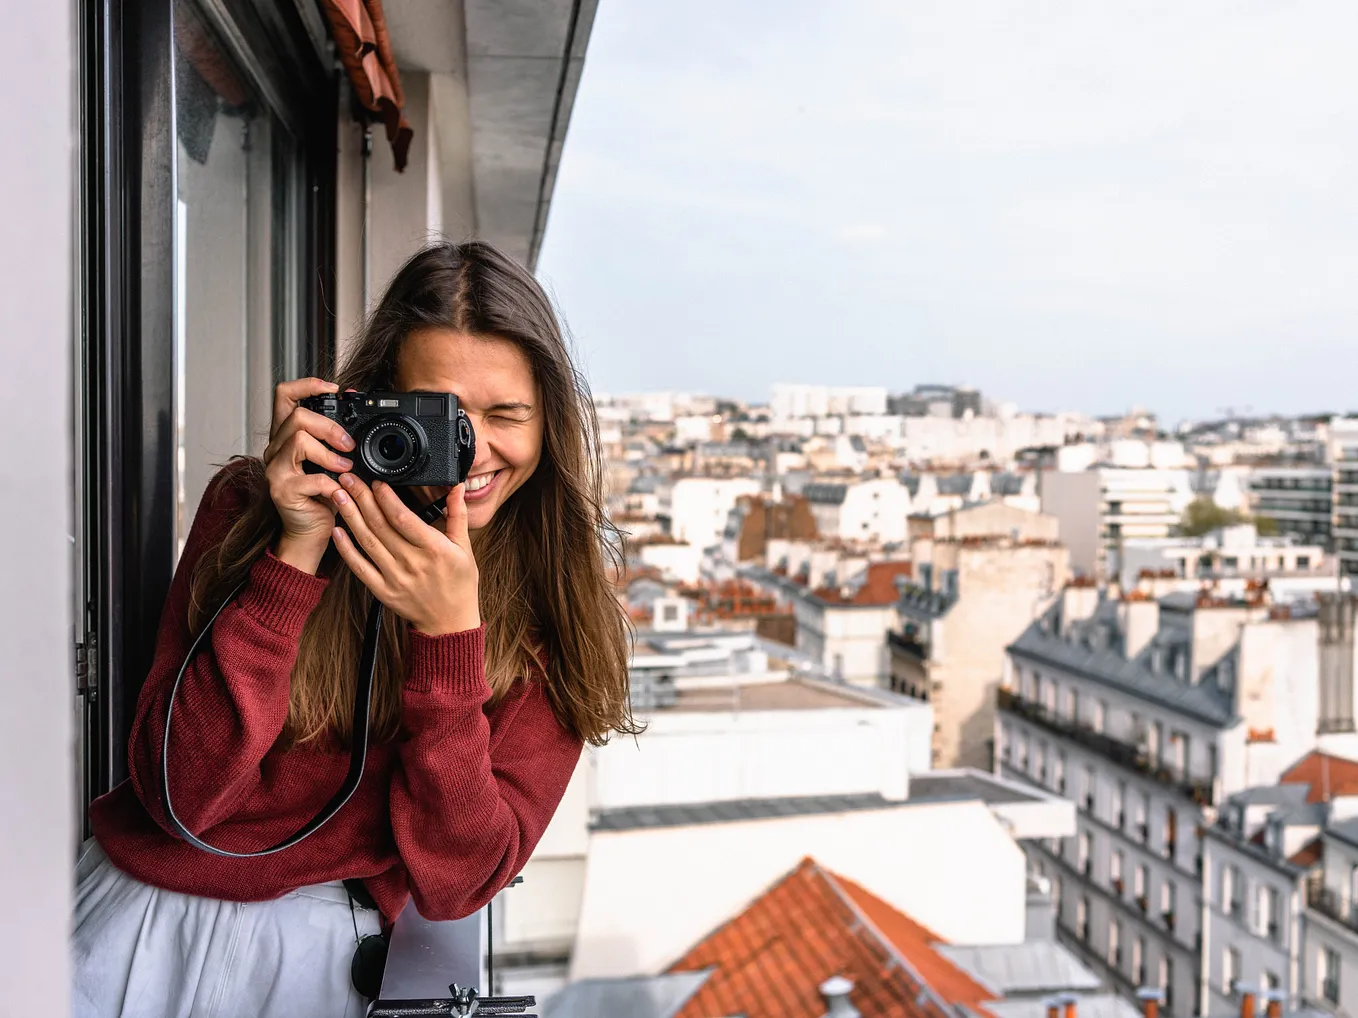 Shoot, Upload, Profit: Maximize Your Earnings with Microstock Photography